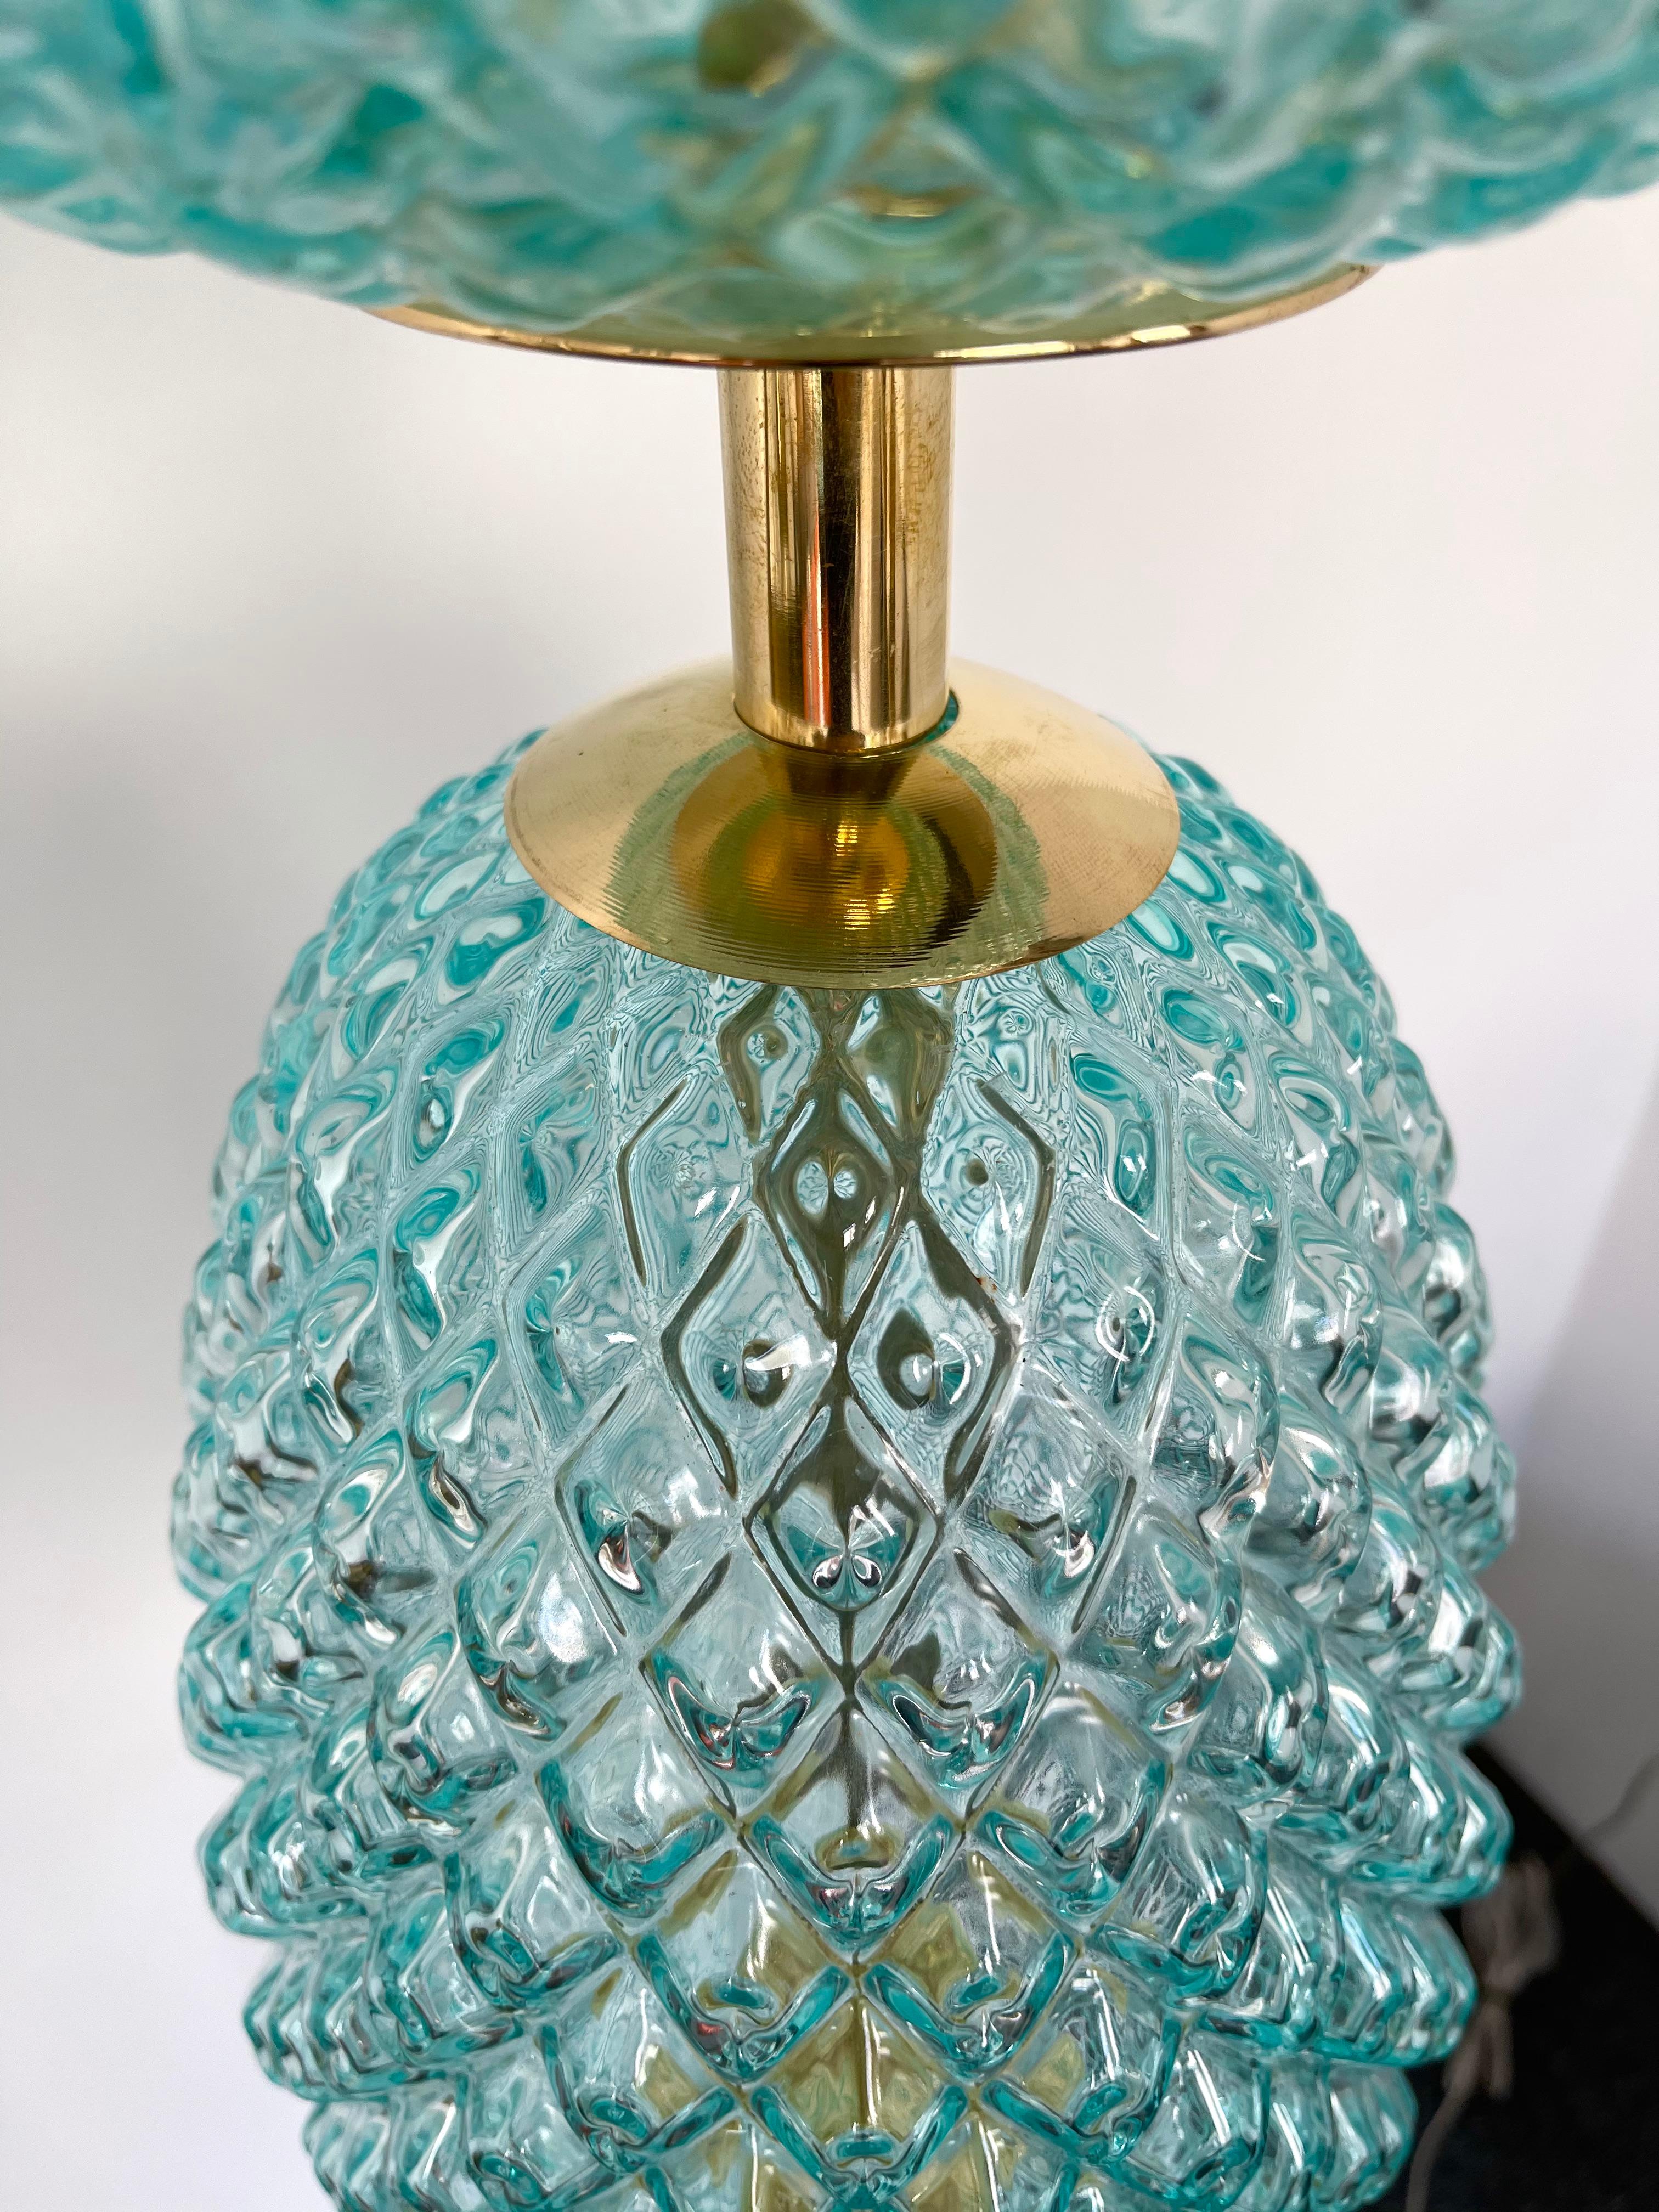 Metal Contemporary Brass Pineapple Murano Glass Floor Lamp, Italy For Sale